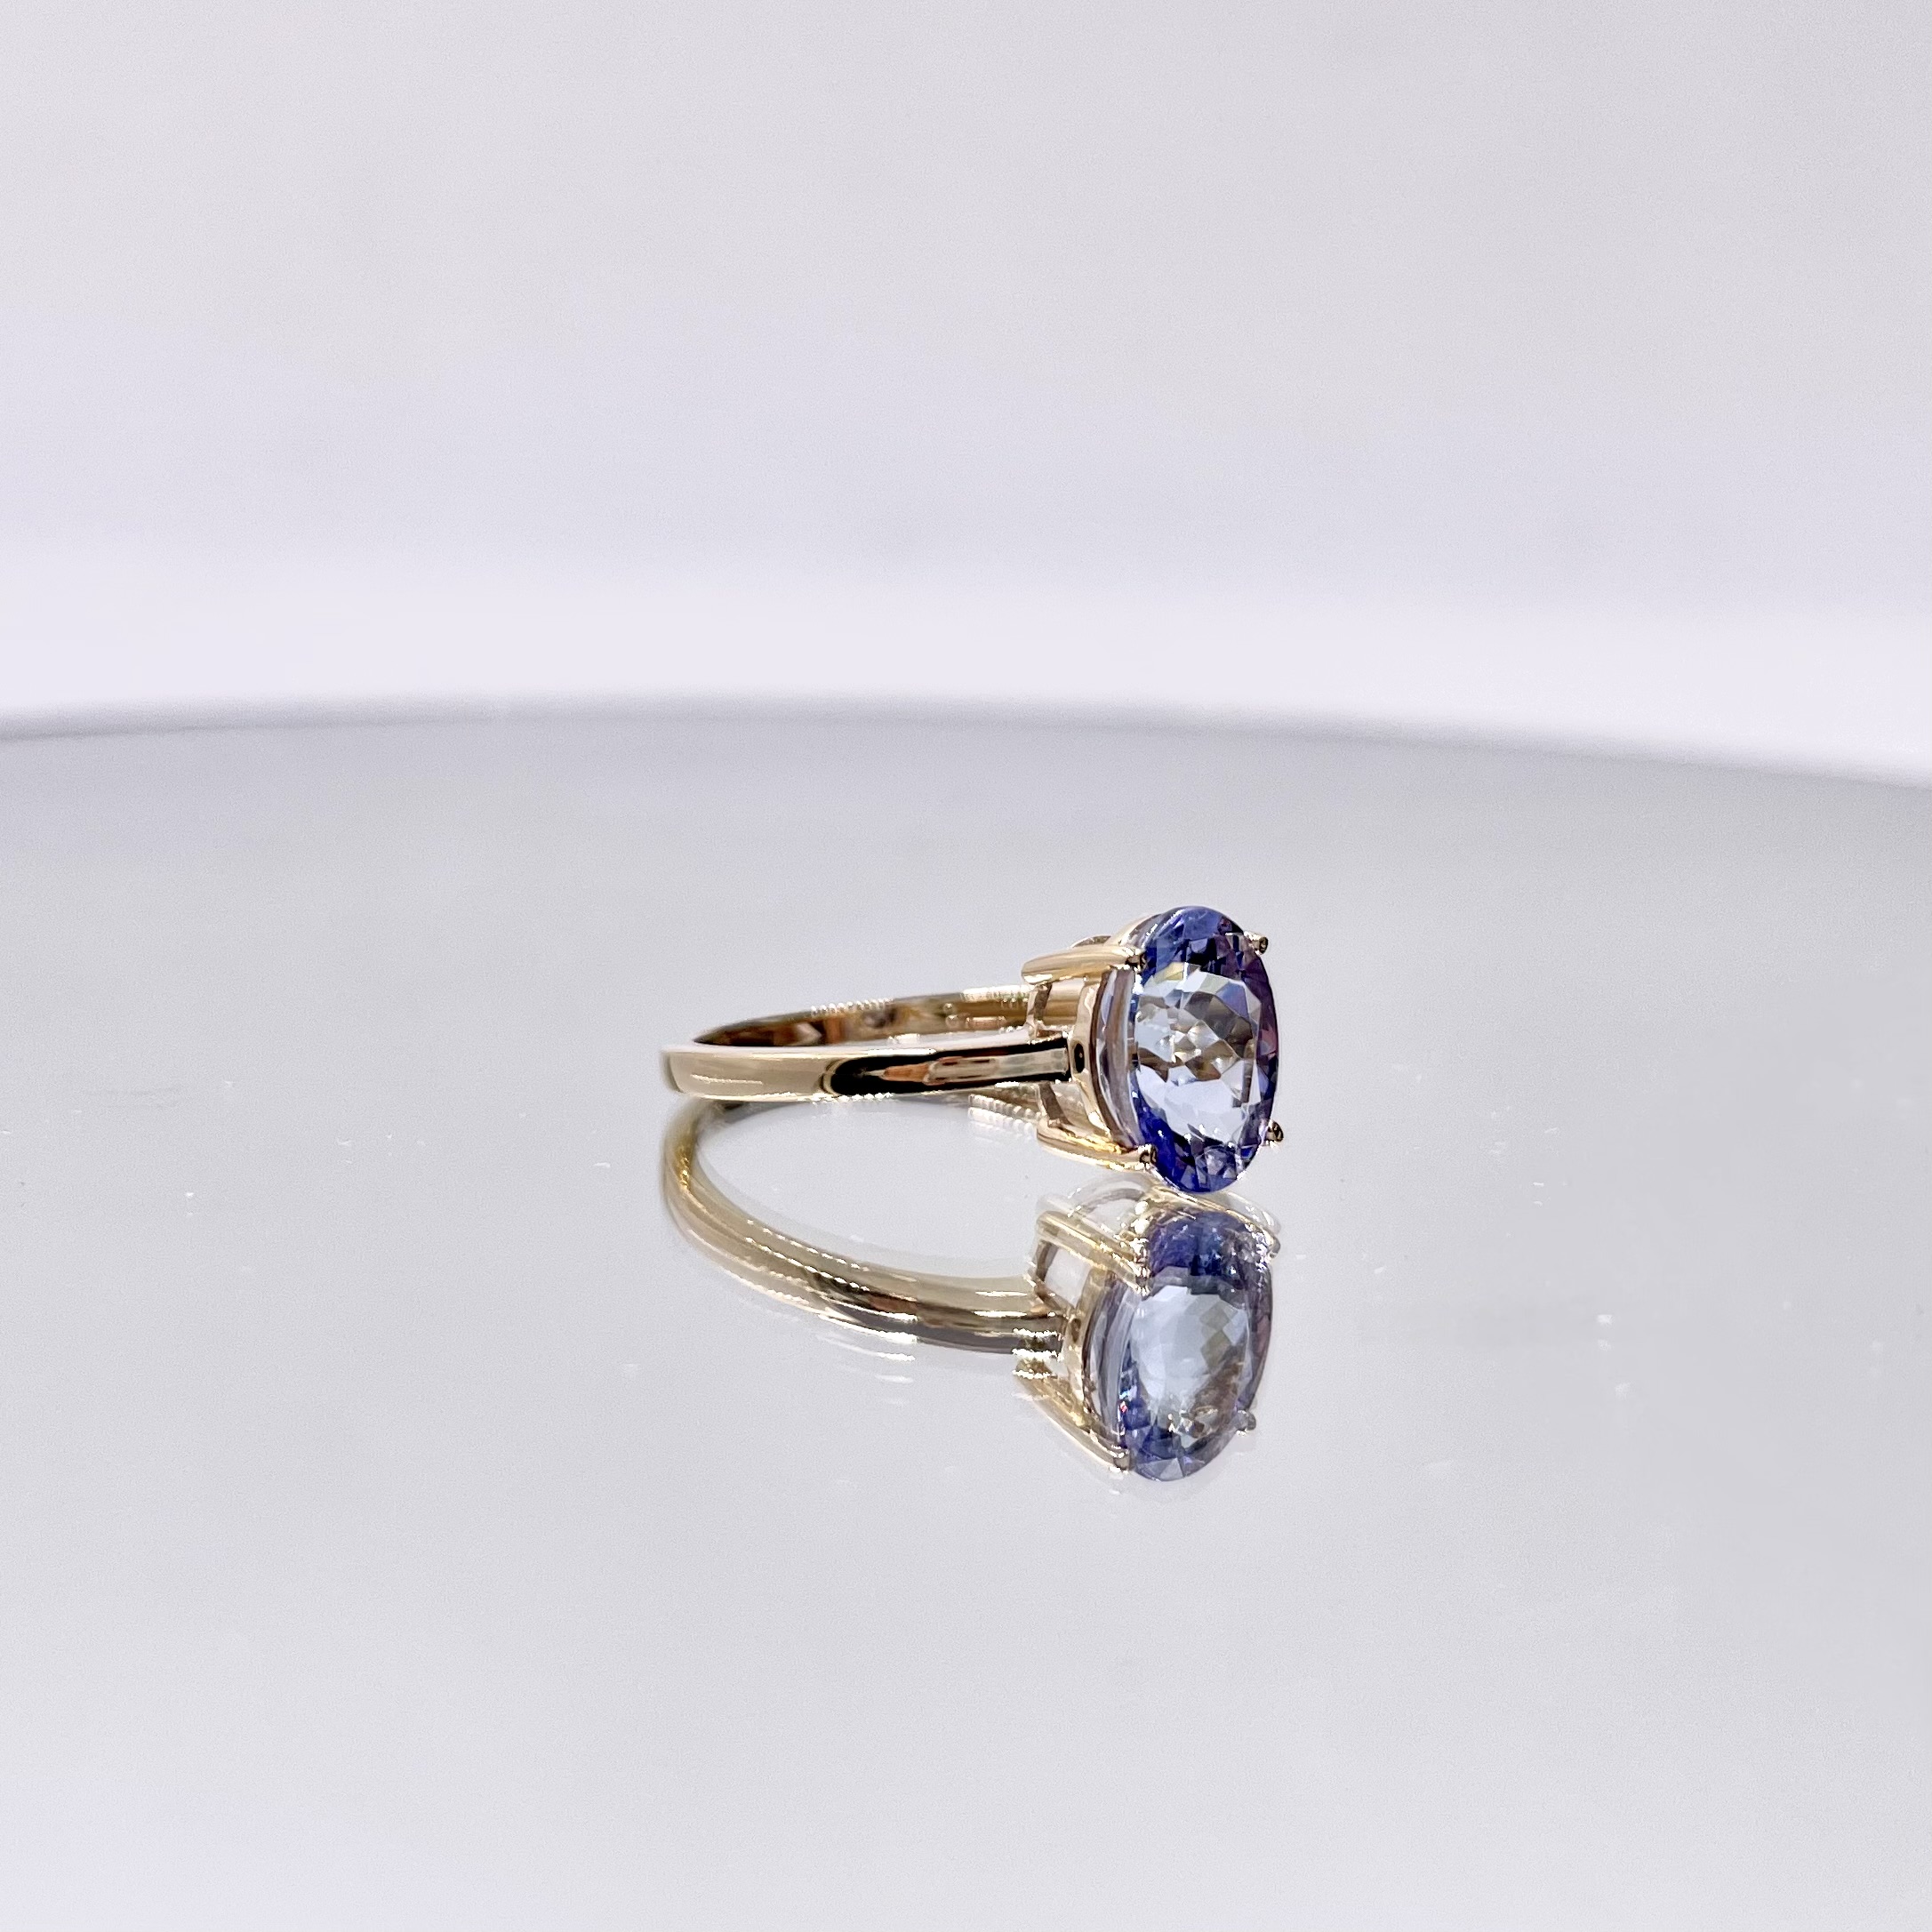 2ct Large Tanzanite Oval Cut 7.0x9.0mm Gold Ring Gift for Women-3